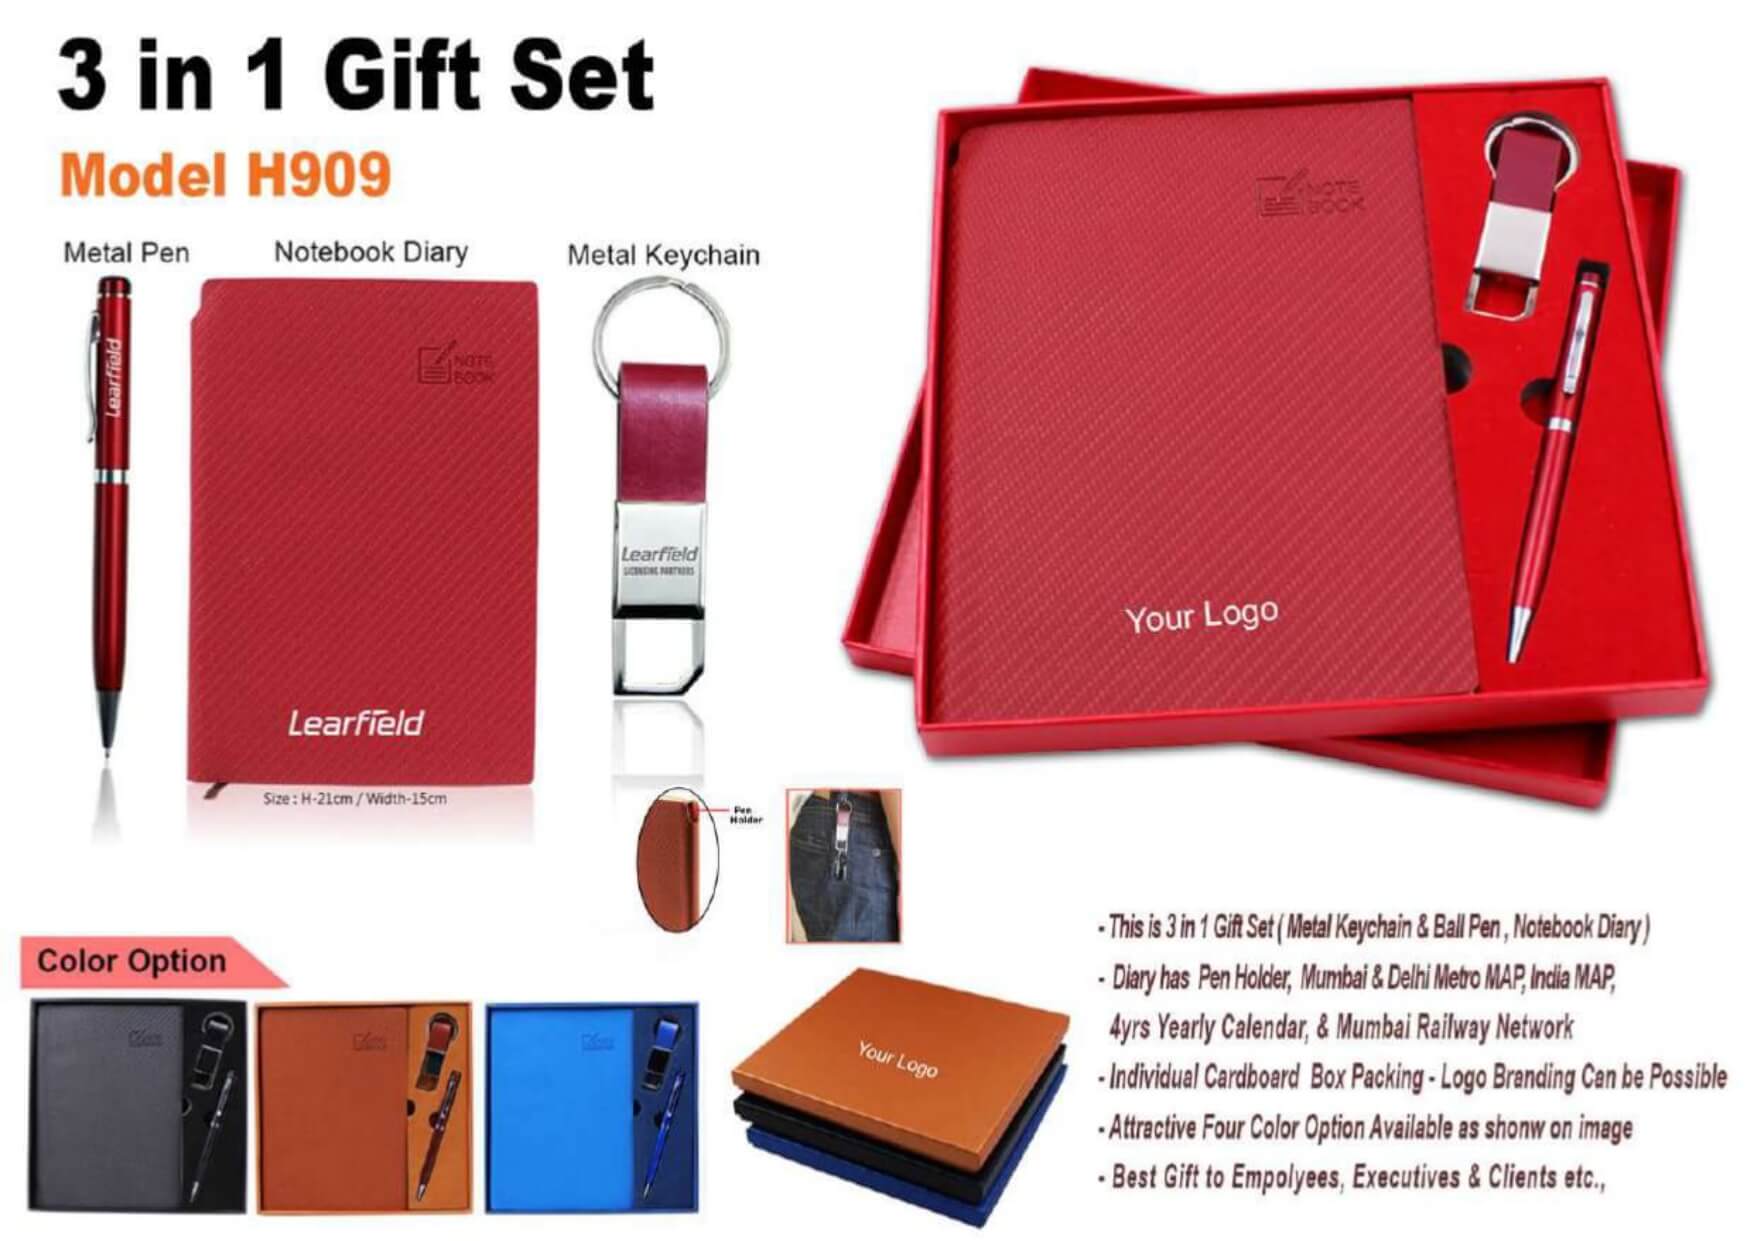 Diary, Pen and Keychain 3 in 1 Gift Set - 909